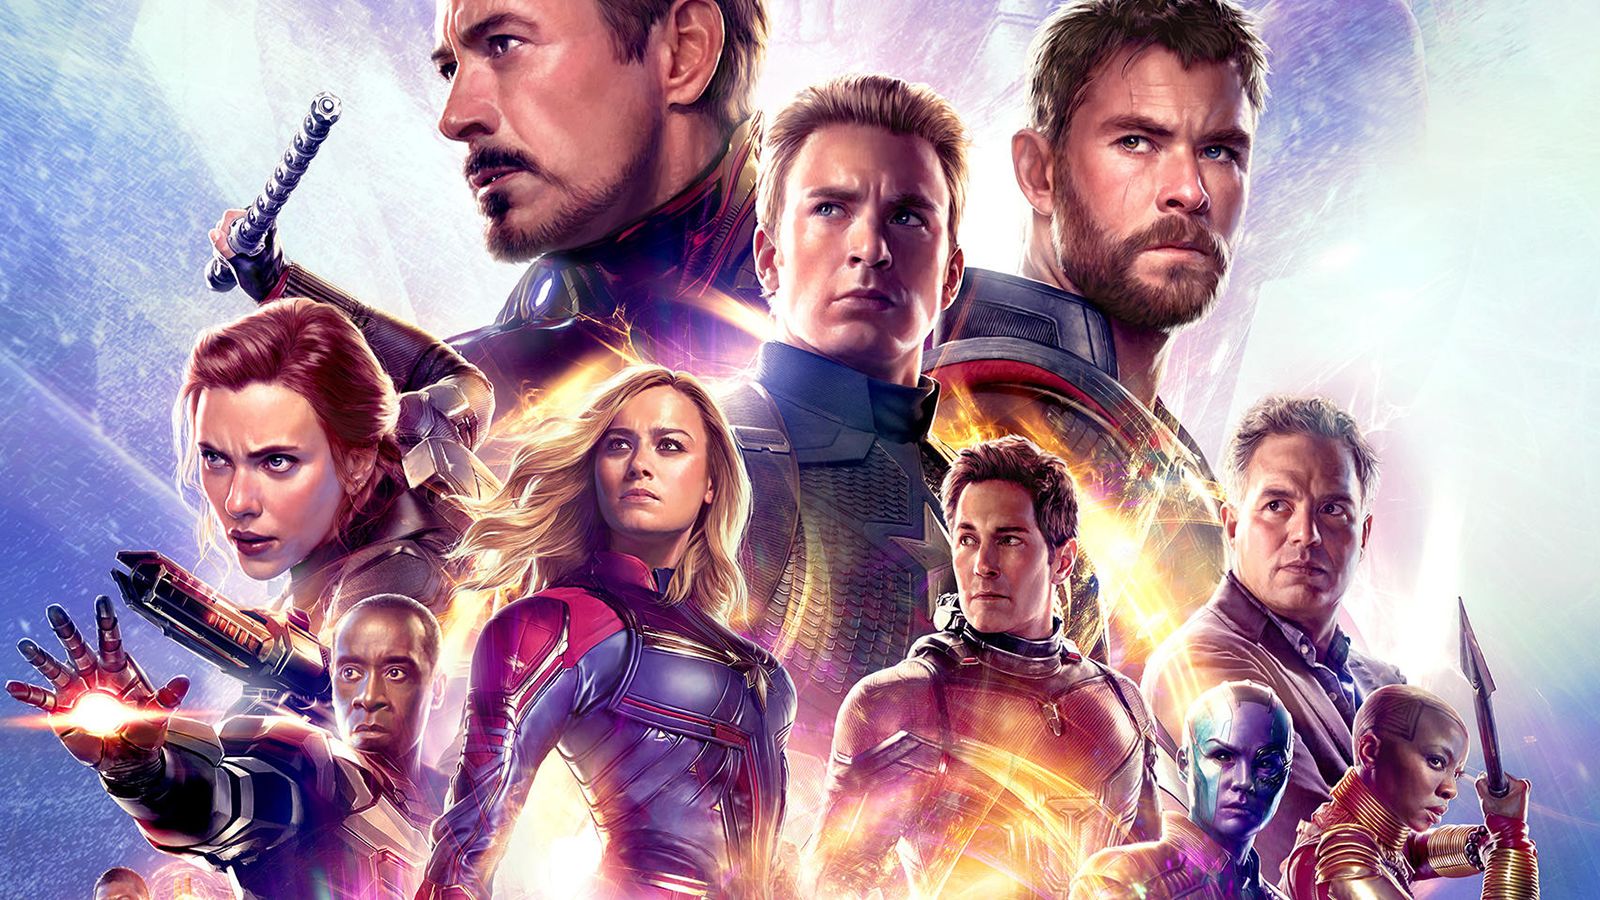 Avengers: Endgame' may mean the end for some Marvel characters